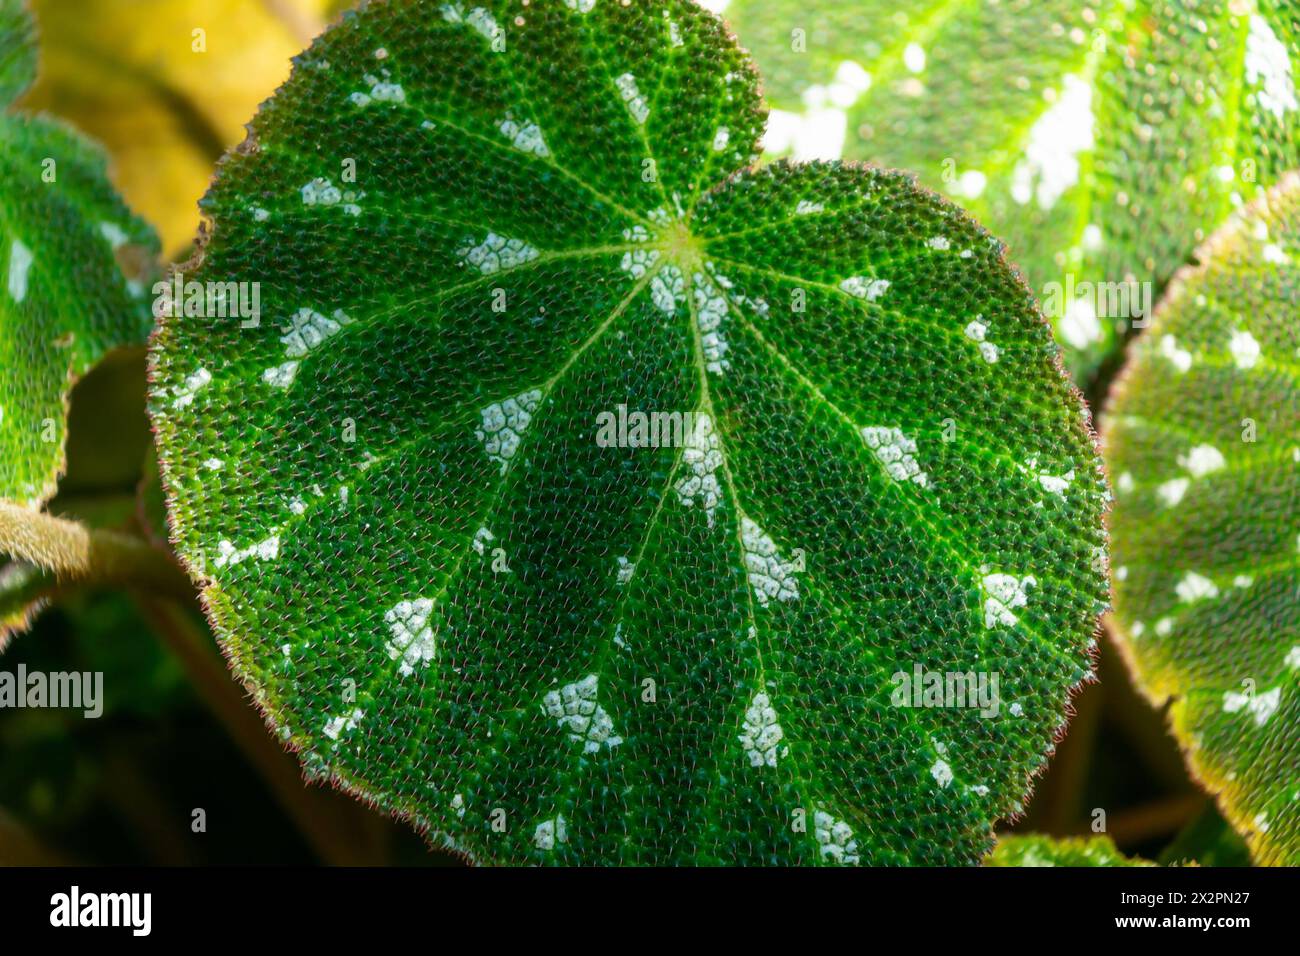 Beautiful green leaves with a pattern, close-up. Begonia imperialis, the imperial begonia. Natural plant background. Stock Photo